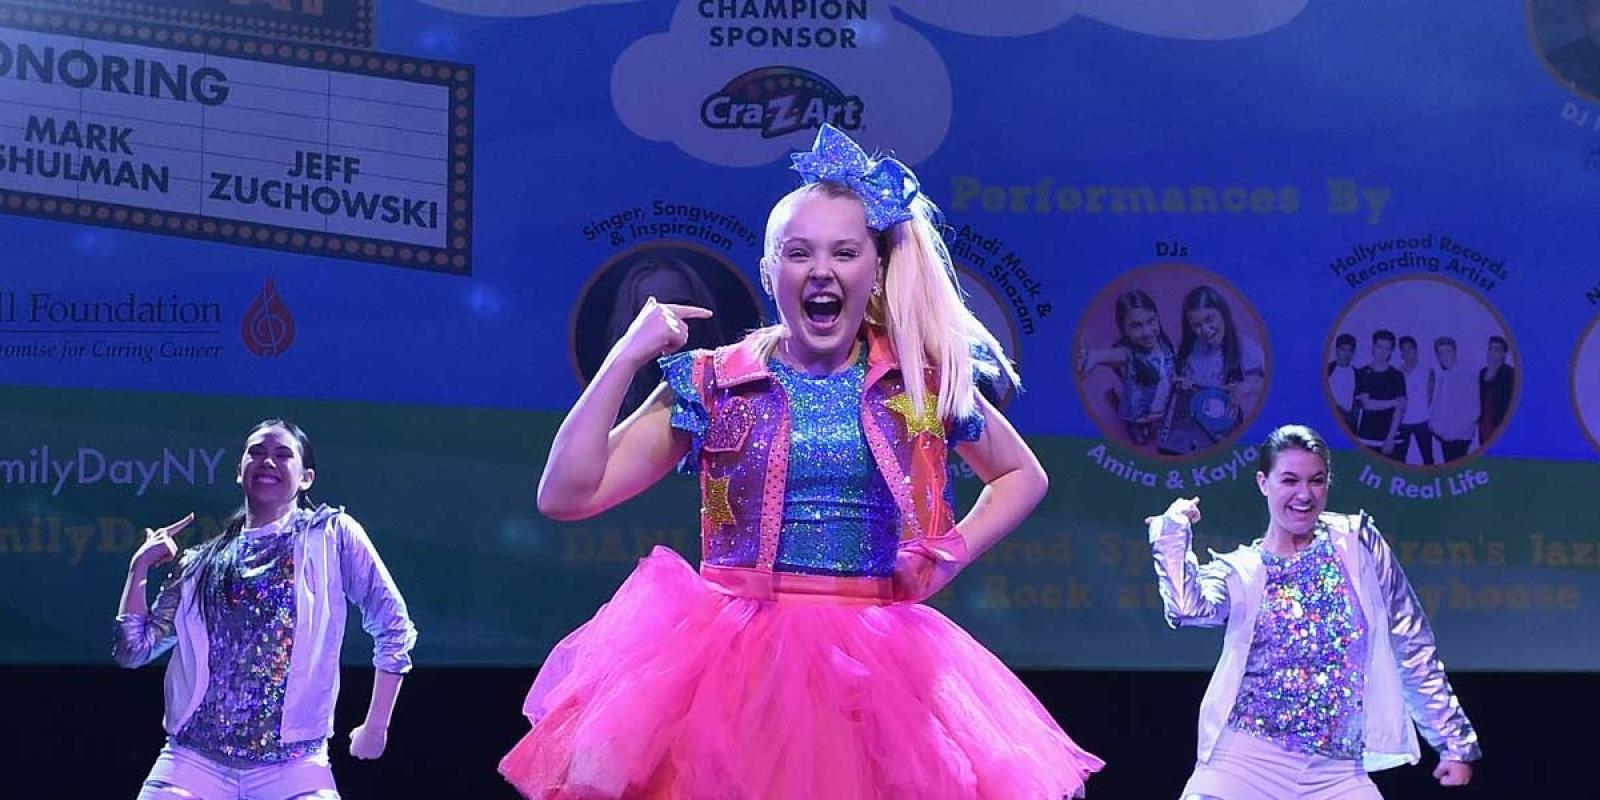 How JoJo Siwa Went From an Influencer to a Consumer Products Powerhouse